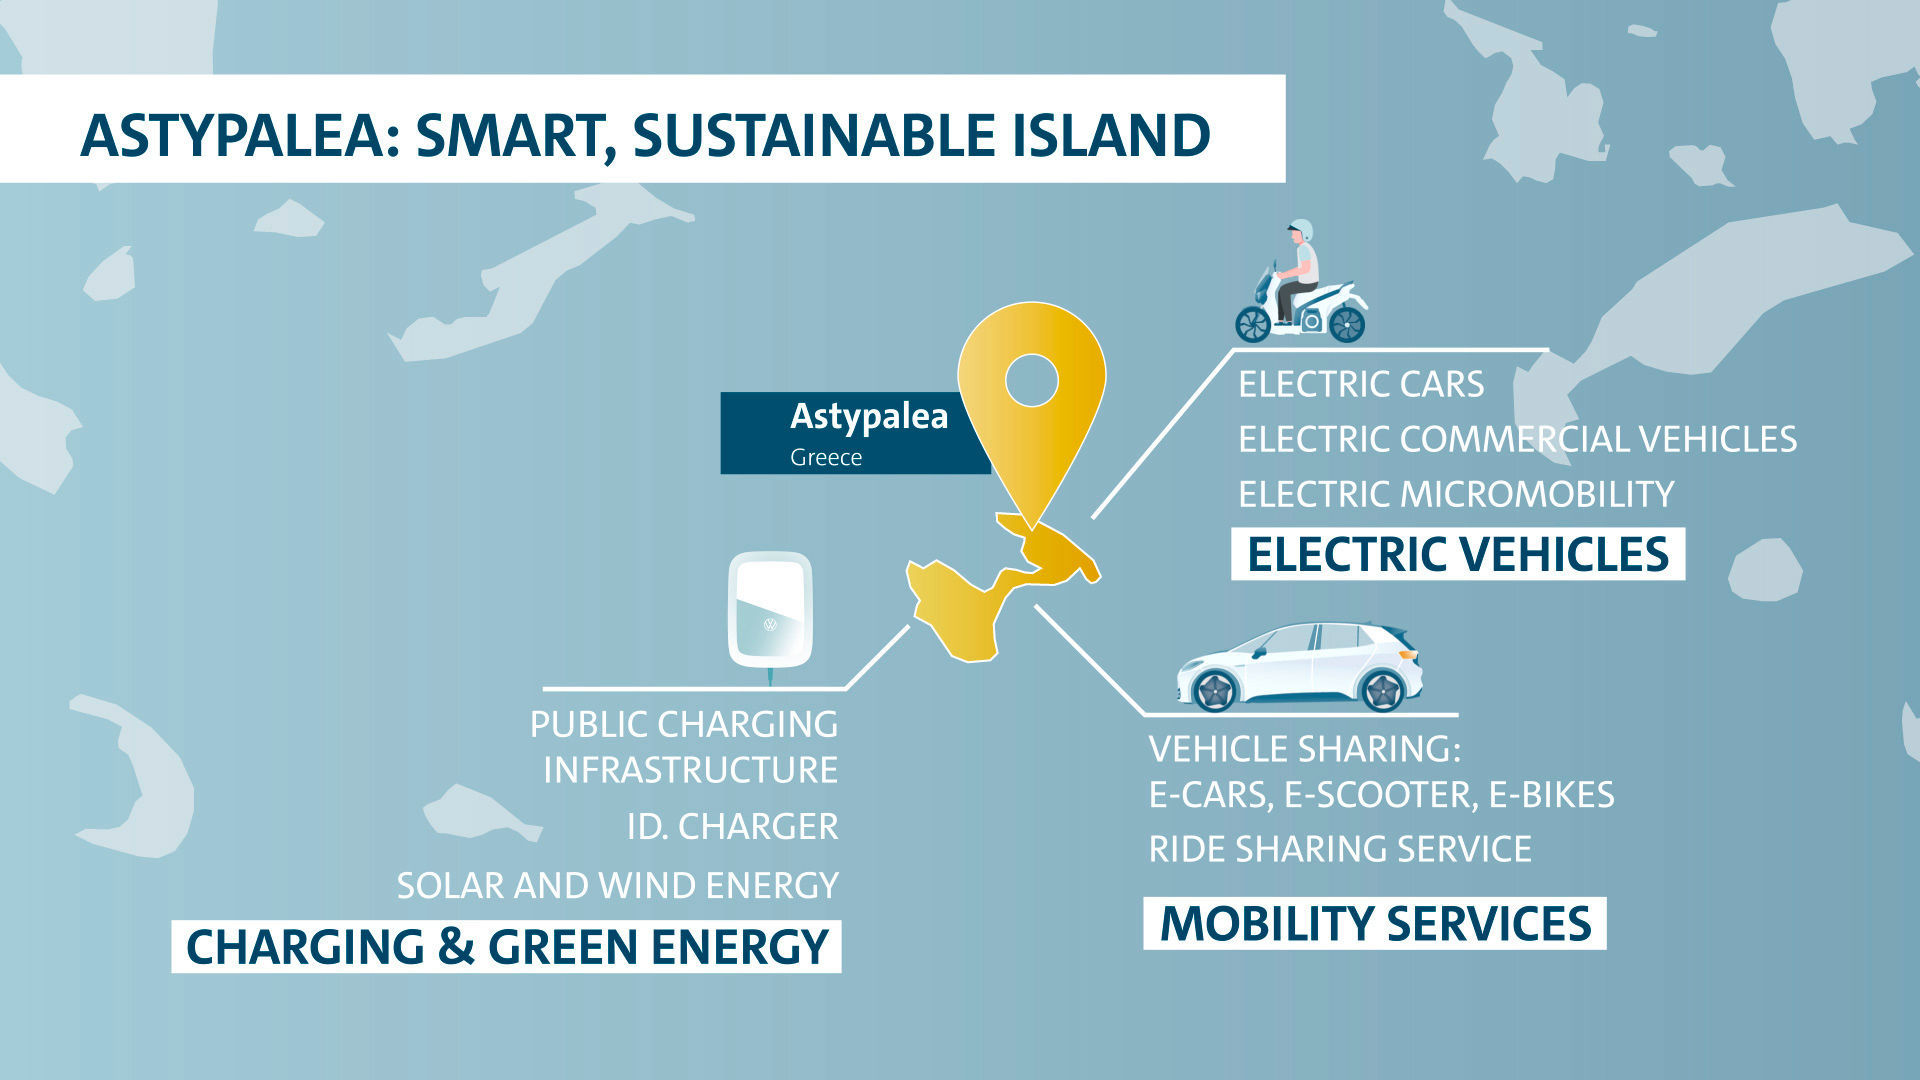 The first electric vehicles have already been launched in Astypalea